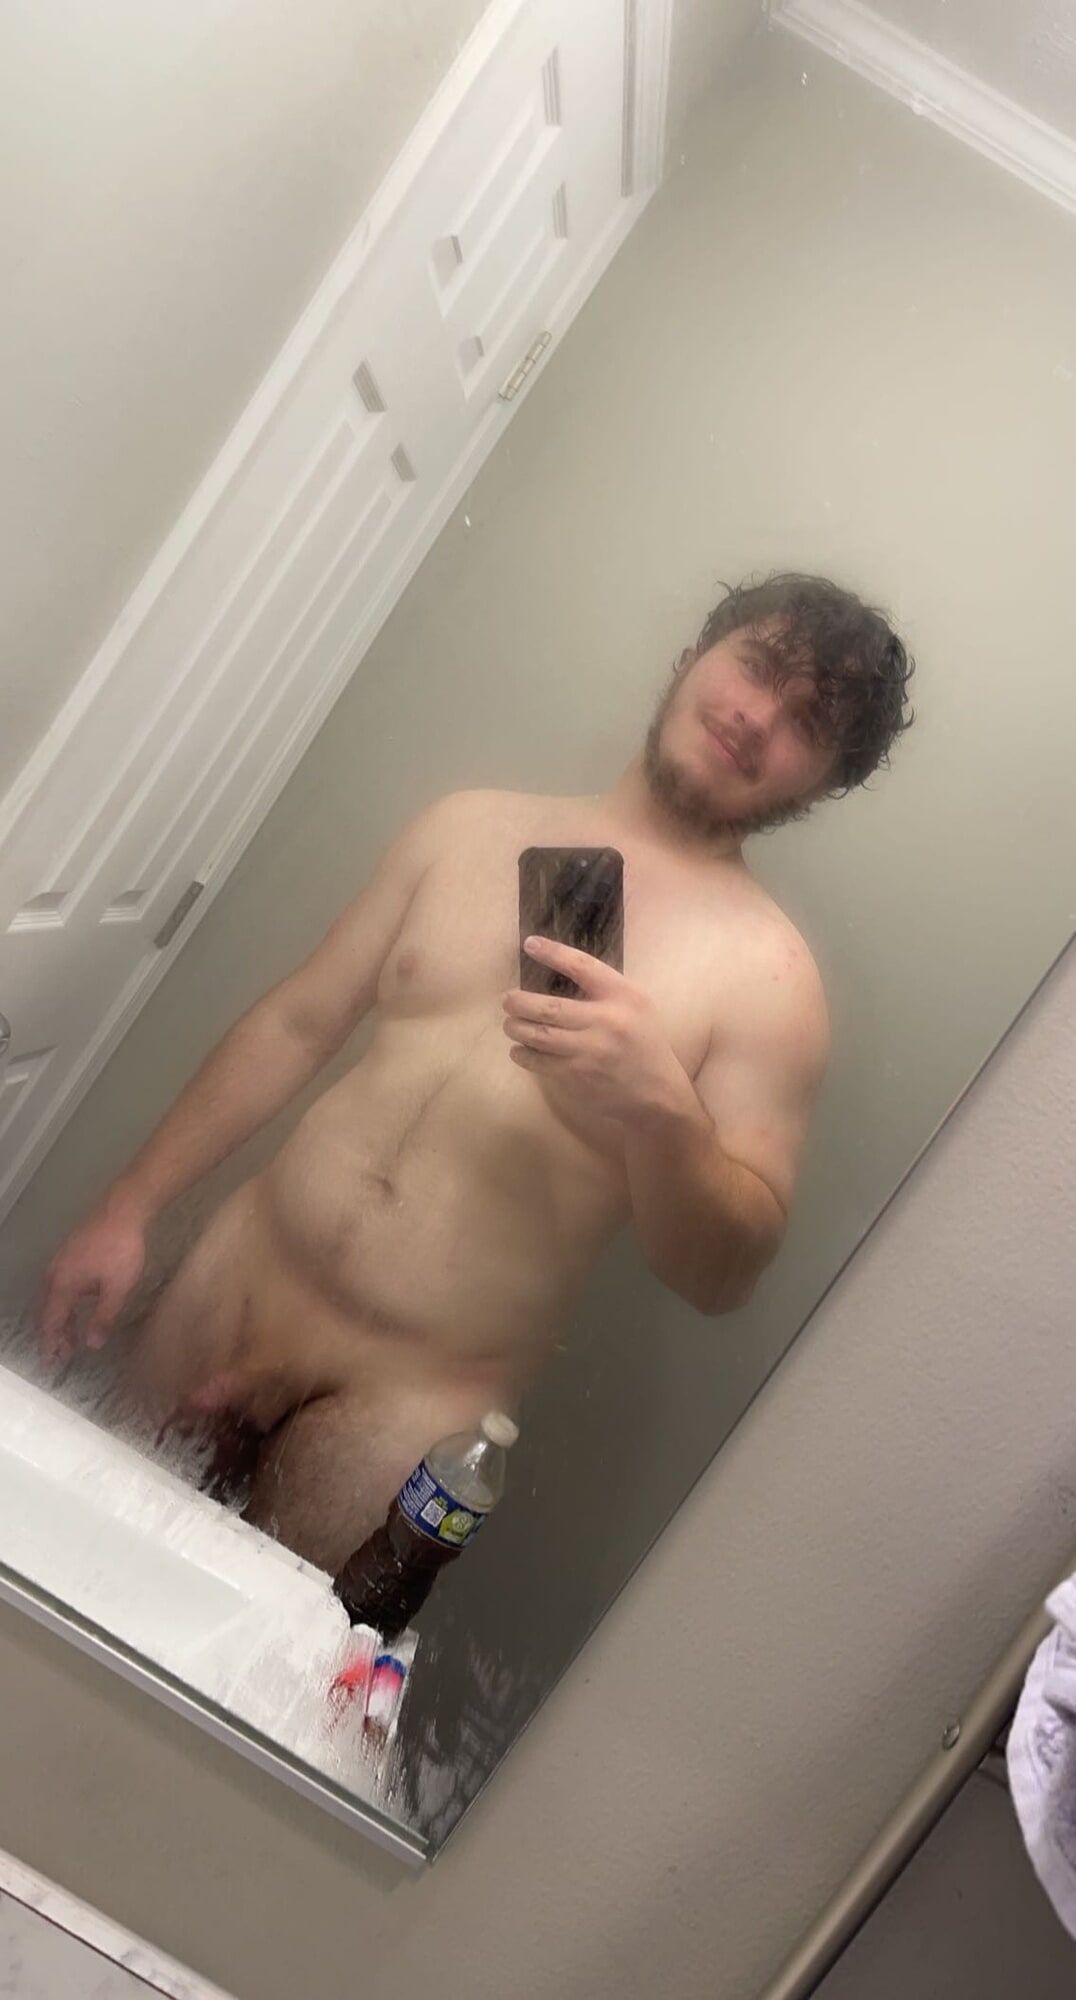 Who’s pussy wants my cock? I want to fuck your pussy so hard #4